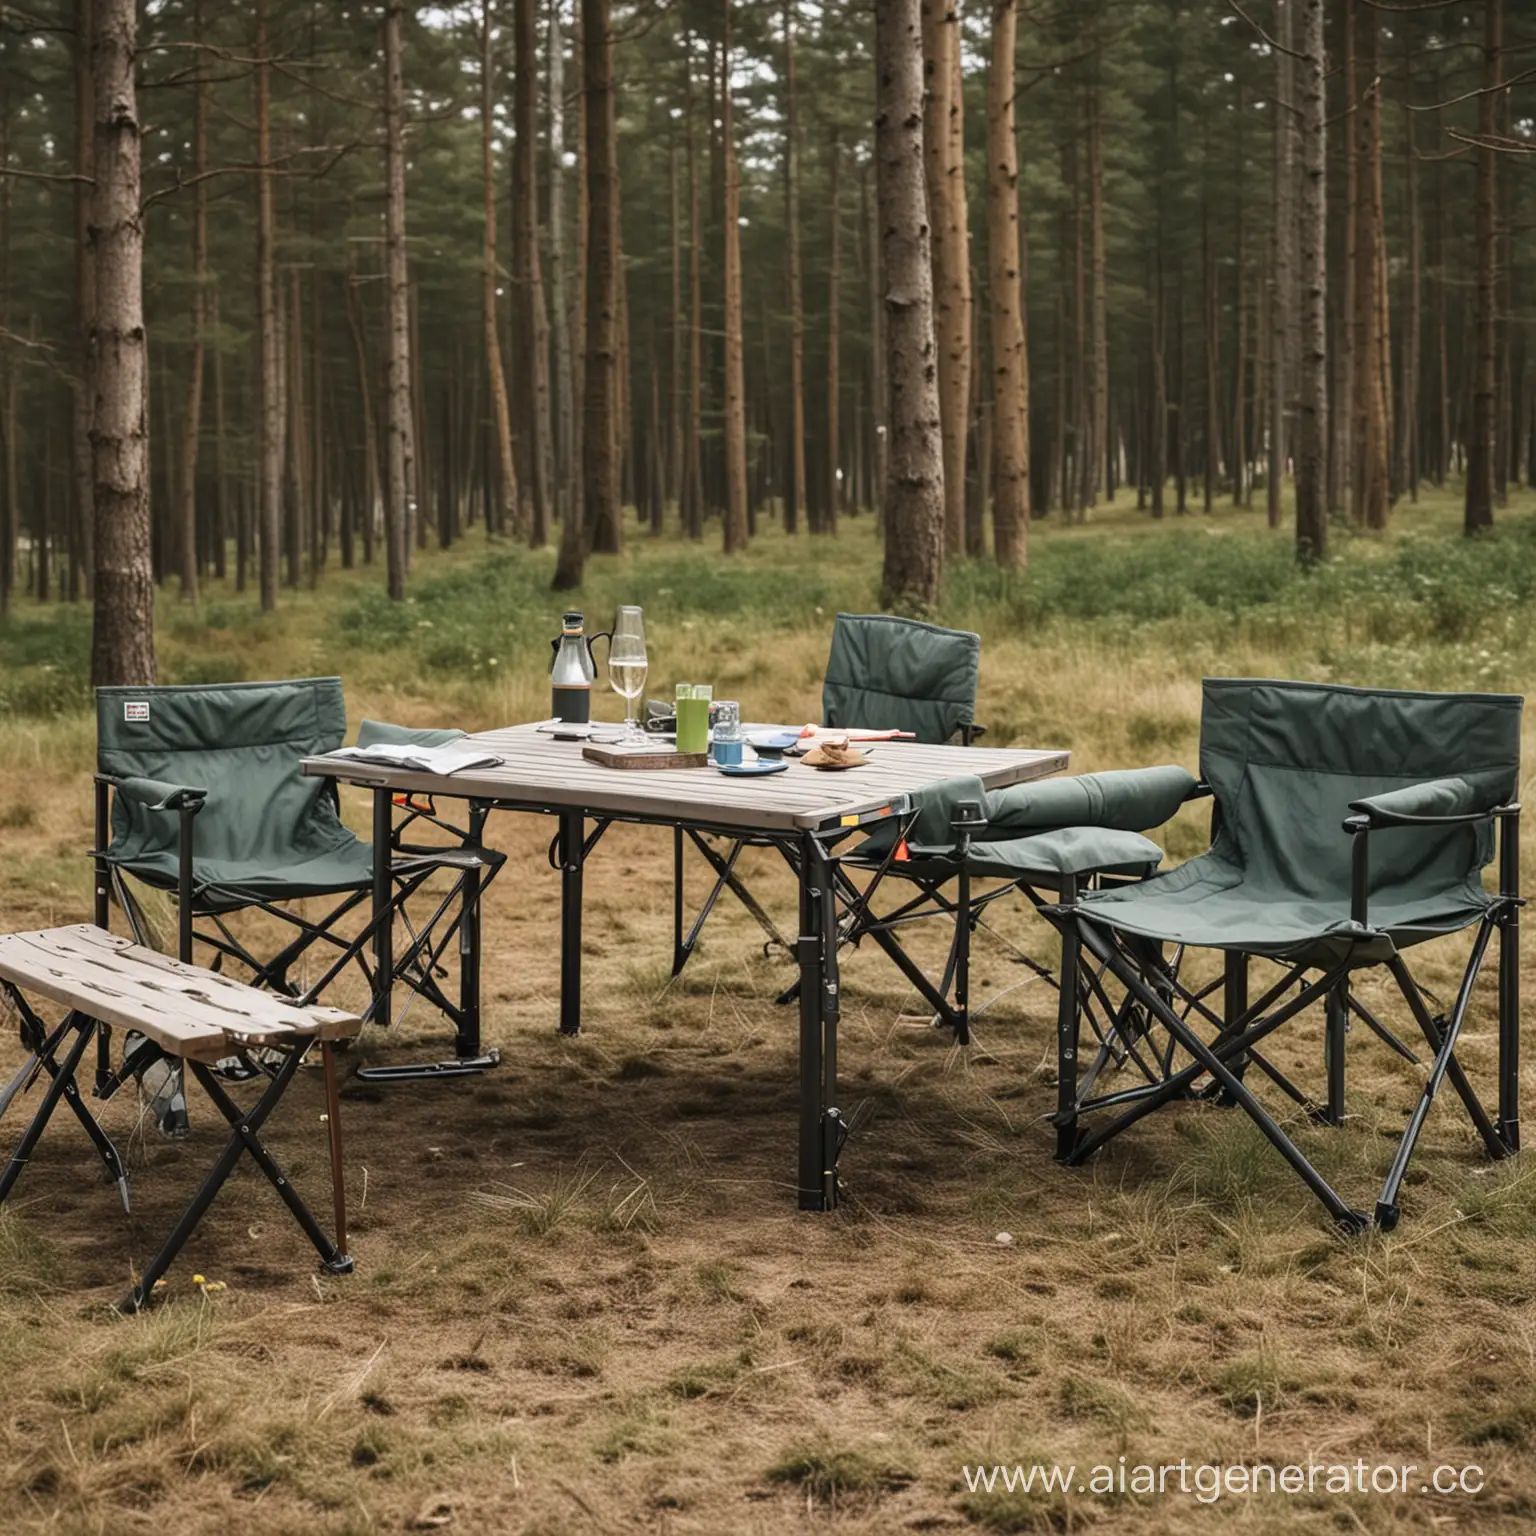 Family-Enjoyment-with-Talberg-Camping-Gear-in-a-Serene-Forest